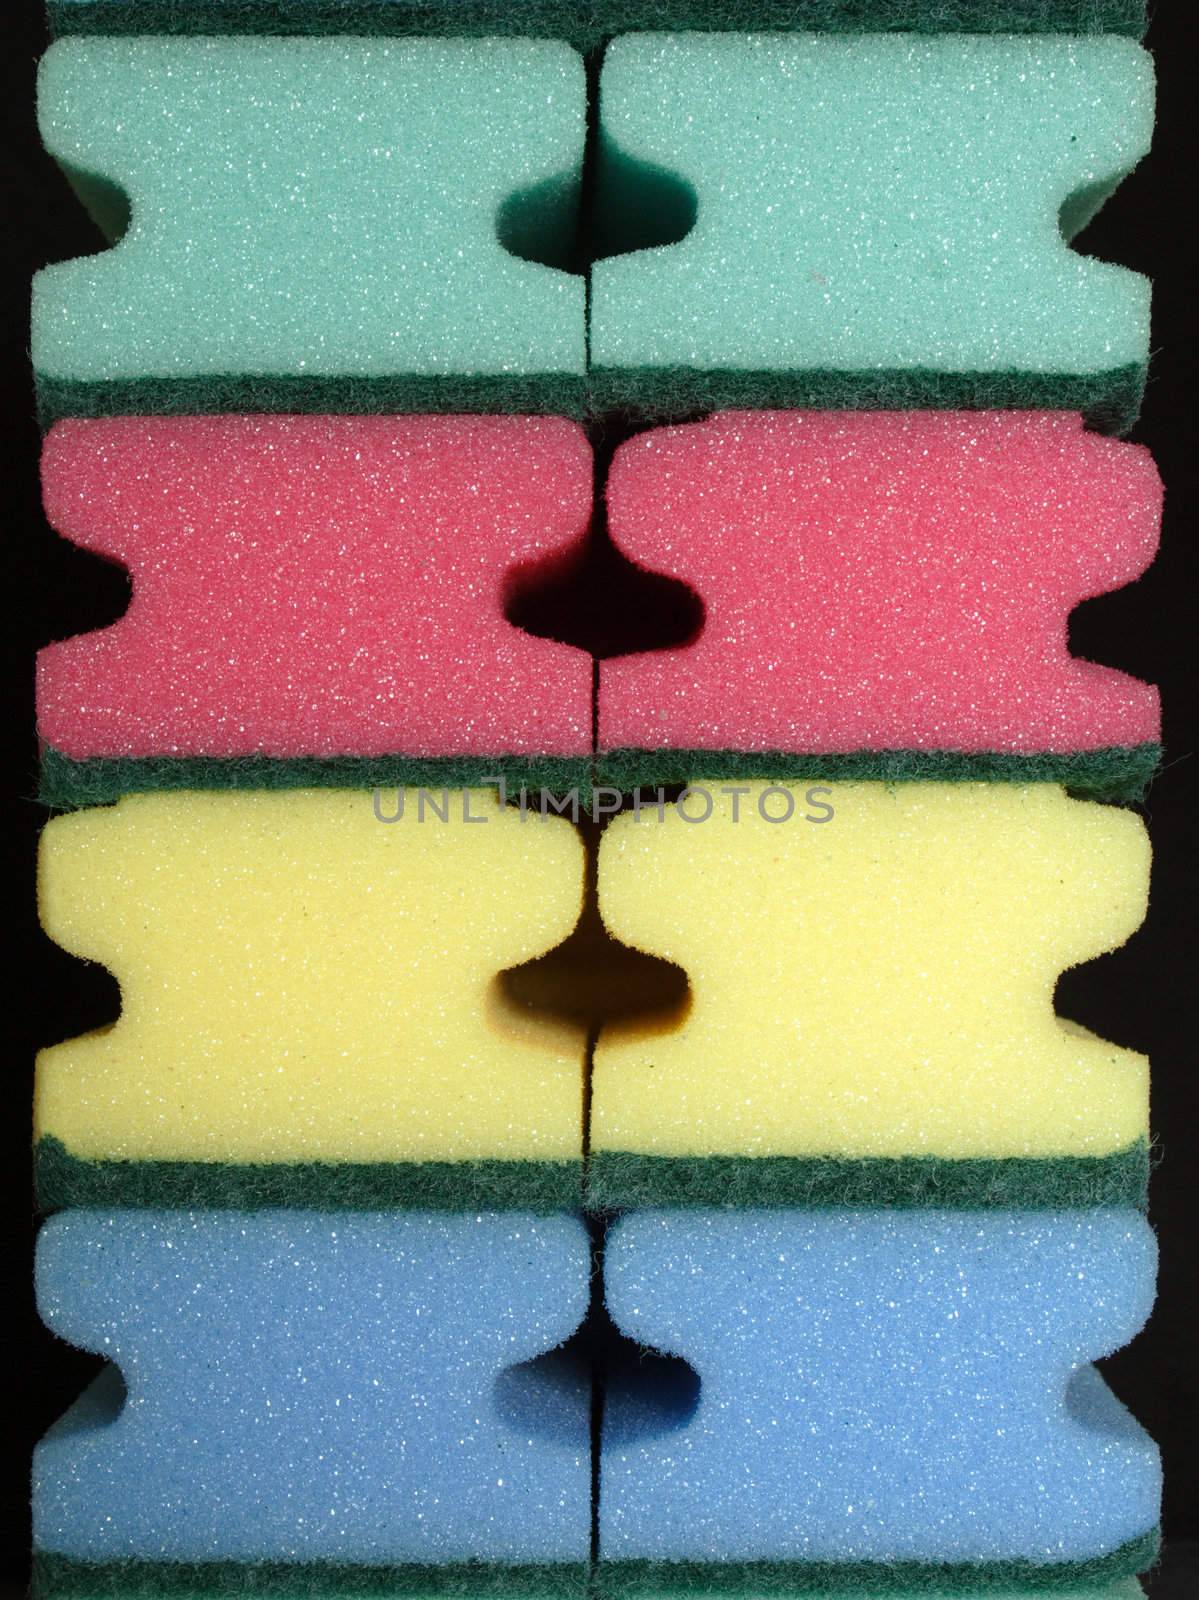 Colourful cleaning sponges against a black background.